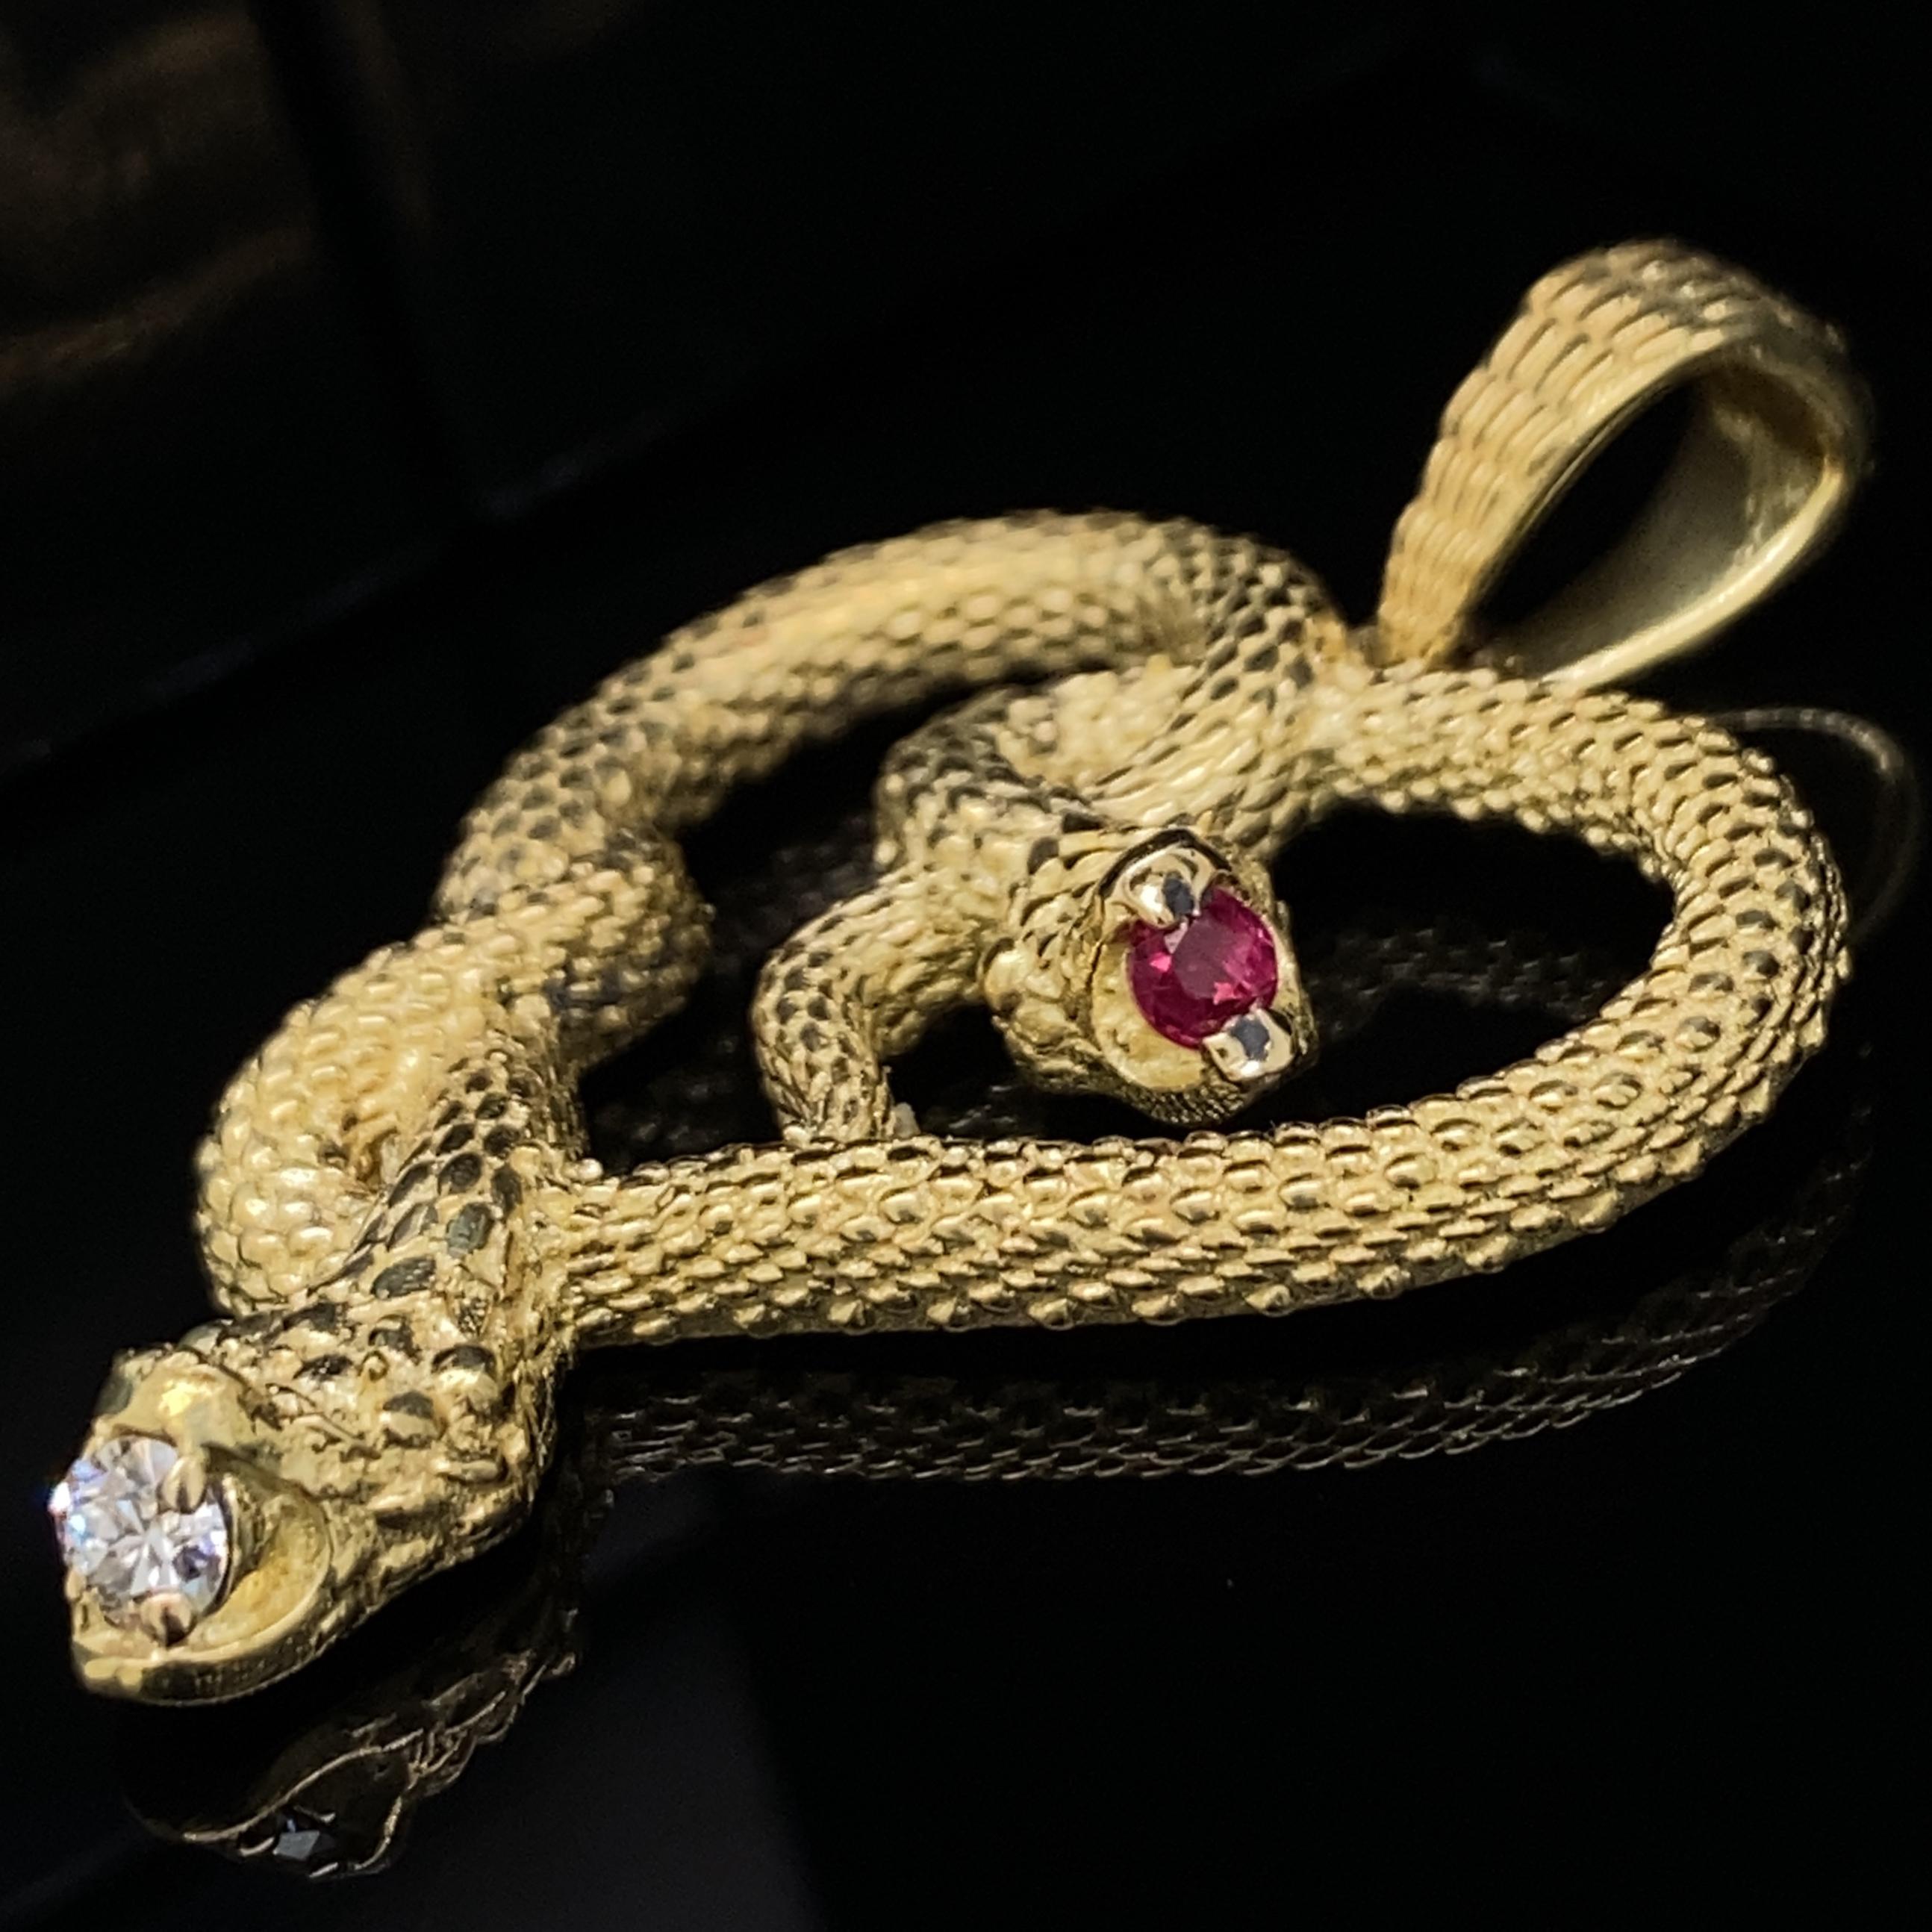 This 18 karat gold pendant is a new design by Eytan Brandes.  It depicts two amorous snakes slithering together to form a heart while they chomp happily on precious gems.  

The smaller snake has a vivid pink ruby (0.75 carats) while the larger